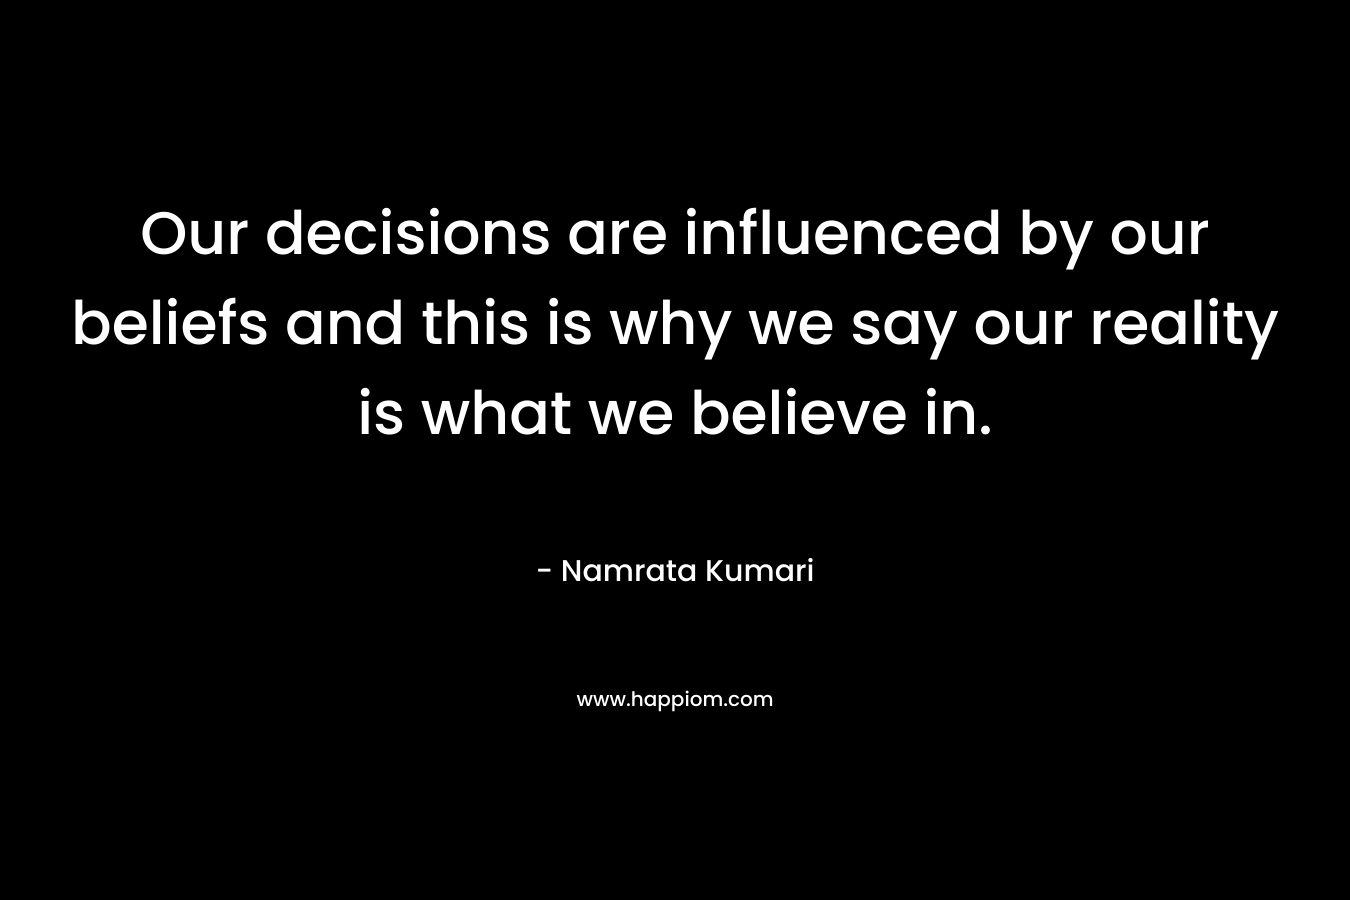 Our decisions are influenced by our beliefs and this is why we say our reality is what we believe in.